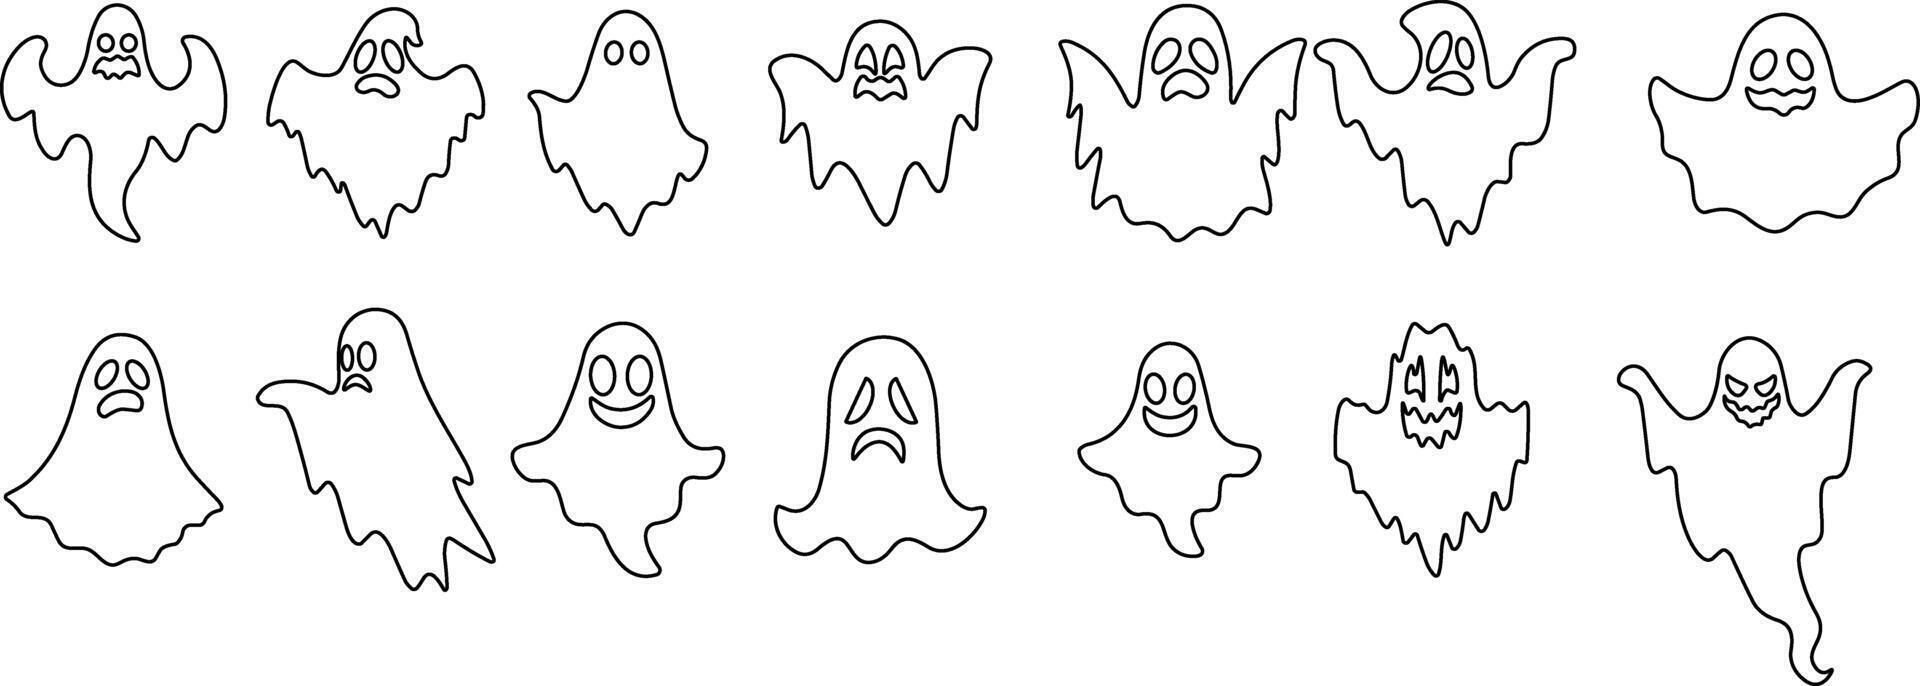 Ghost icon set Vector. Halloween concept, Cartoon Ghosts, black ghost with eyes, spooky character, ghoul or spirit monsters silhouettes with spooky faces. Horror holiday flying phantoms or nightmare vector